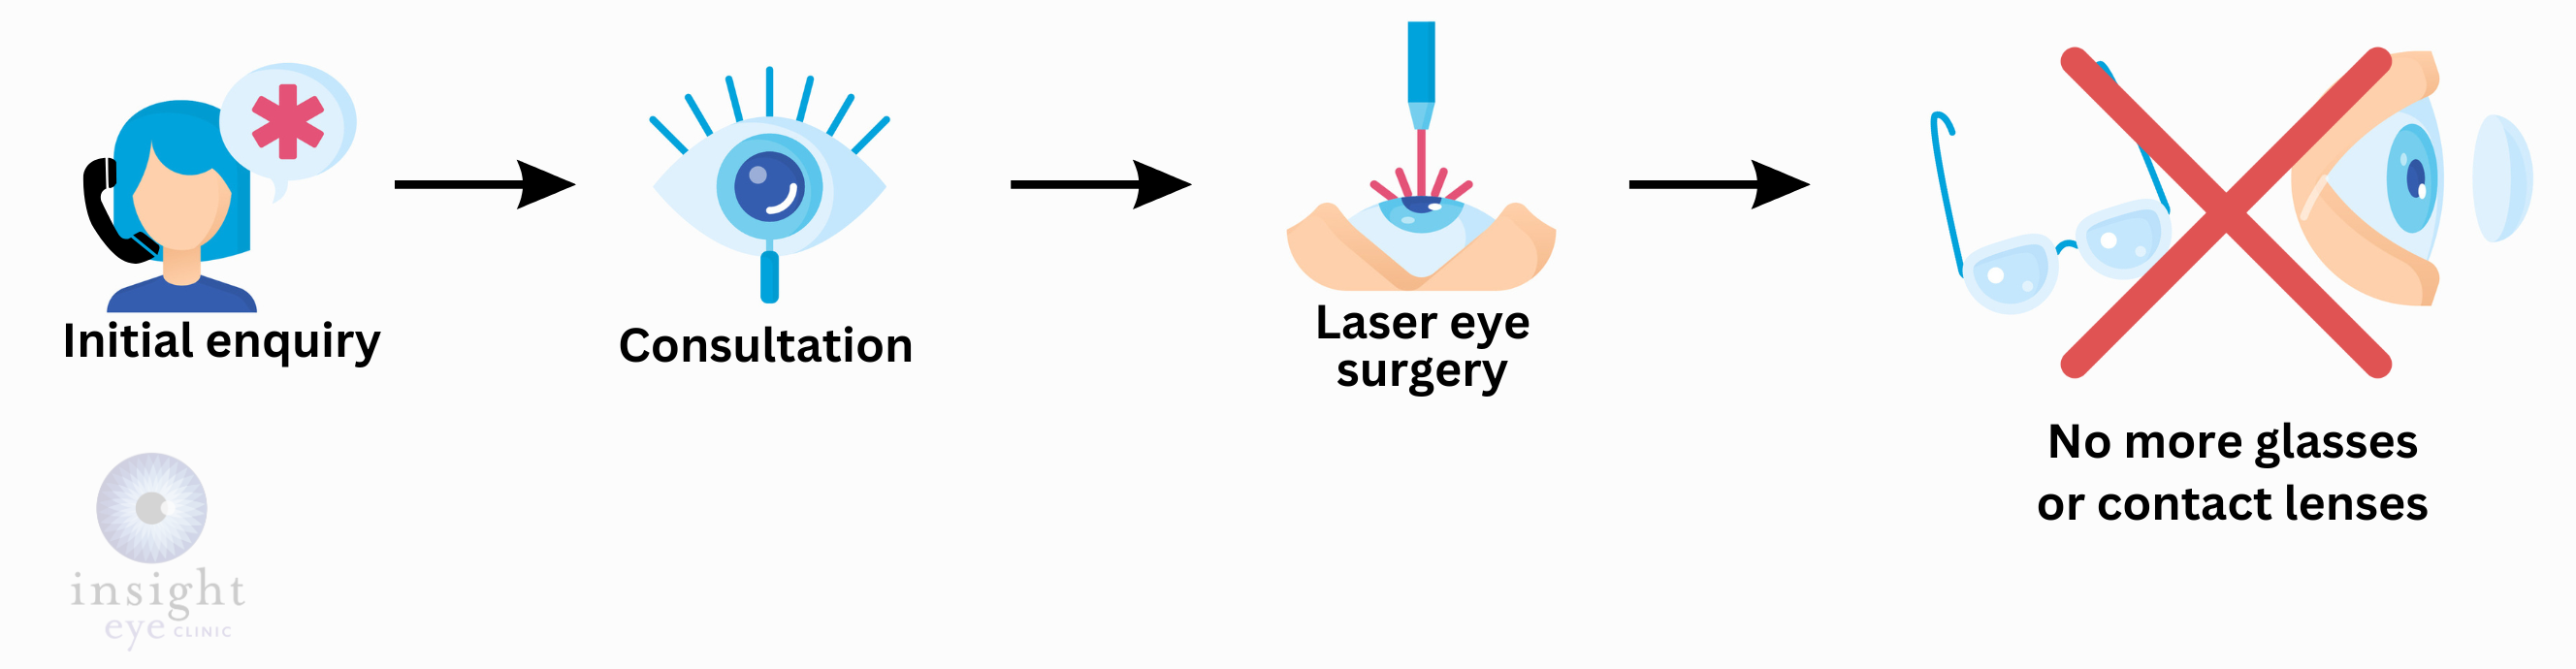 Digital image portraying the steps to take to complete laser eye surgery. 1. Initial enqury 2. Consultation 3. Laser Eye Surgery 4. No more glasses or contact lenses